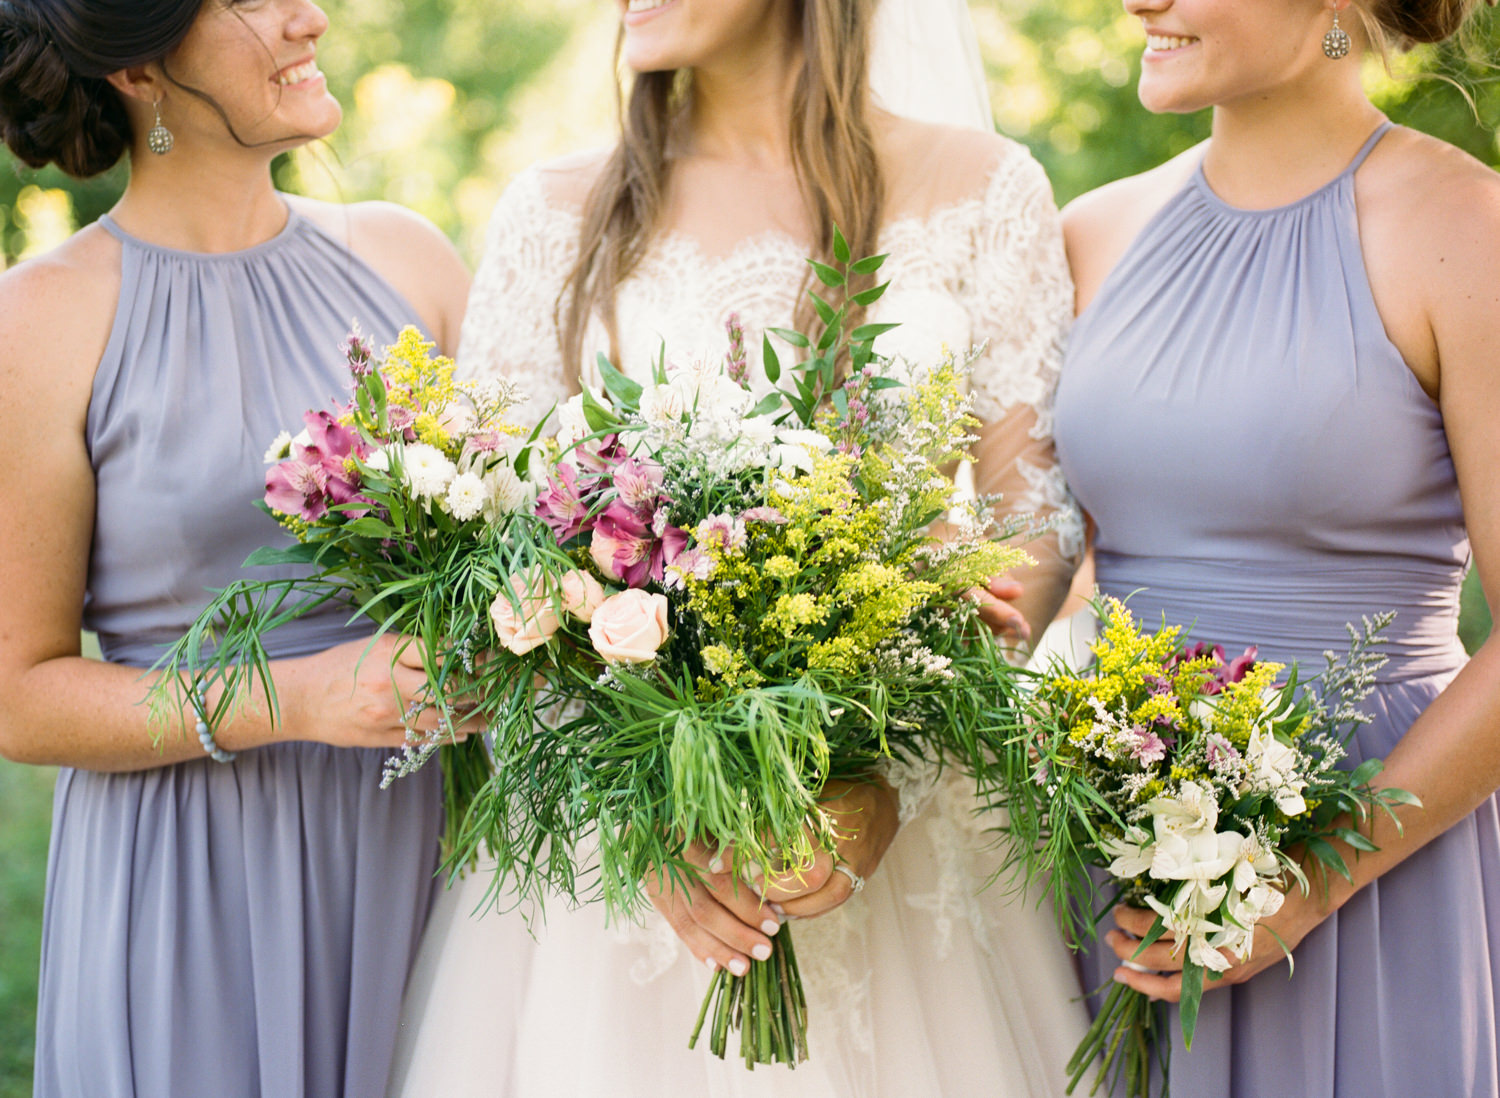 Bride and bridesmaids with wildflower bouquets; St. Louis fine art film wedding photographer Erica Robnett Photography